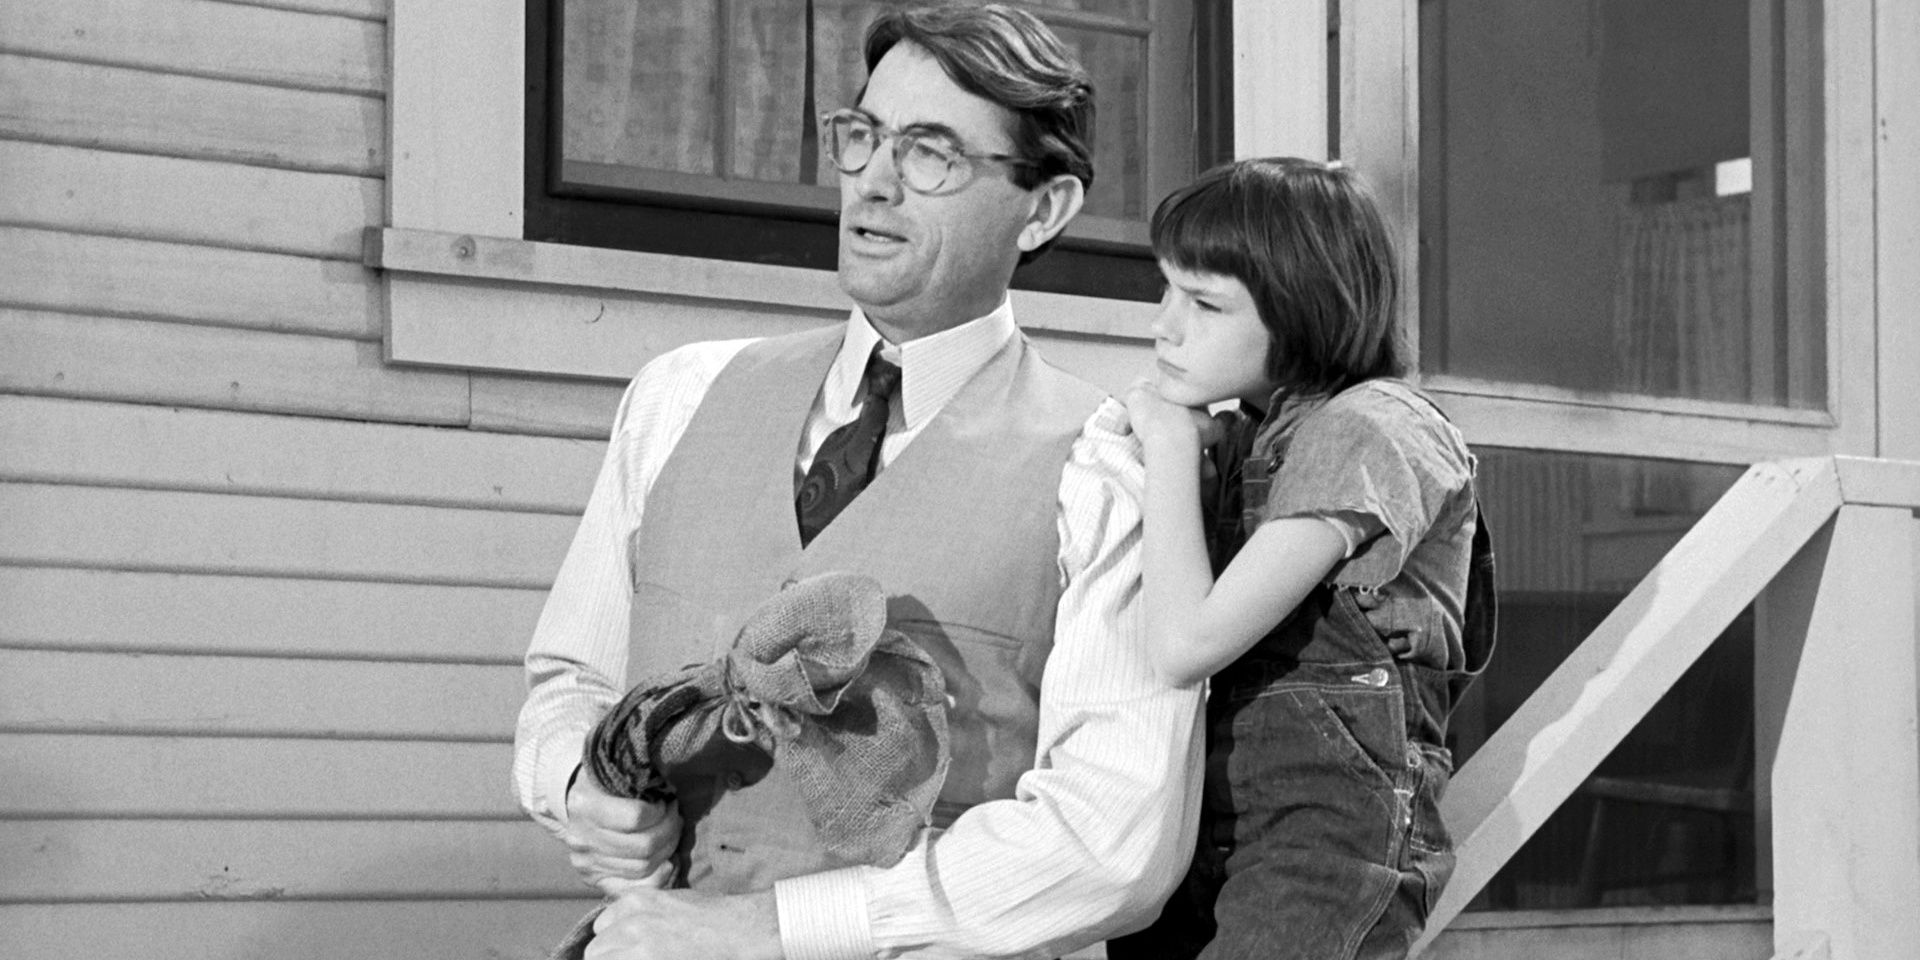 Atticus and Scout together on the porch in To Kill A Mockingbird